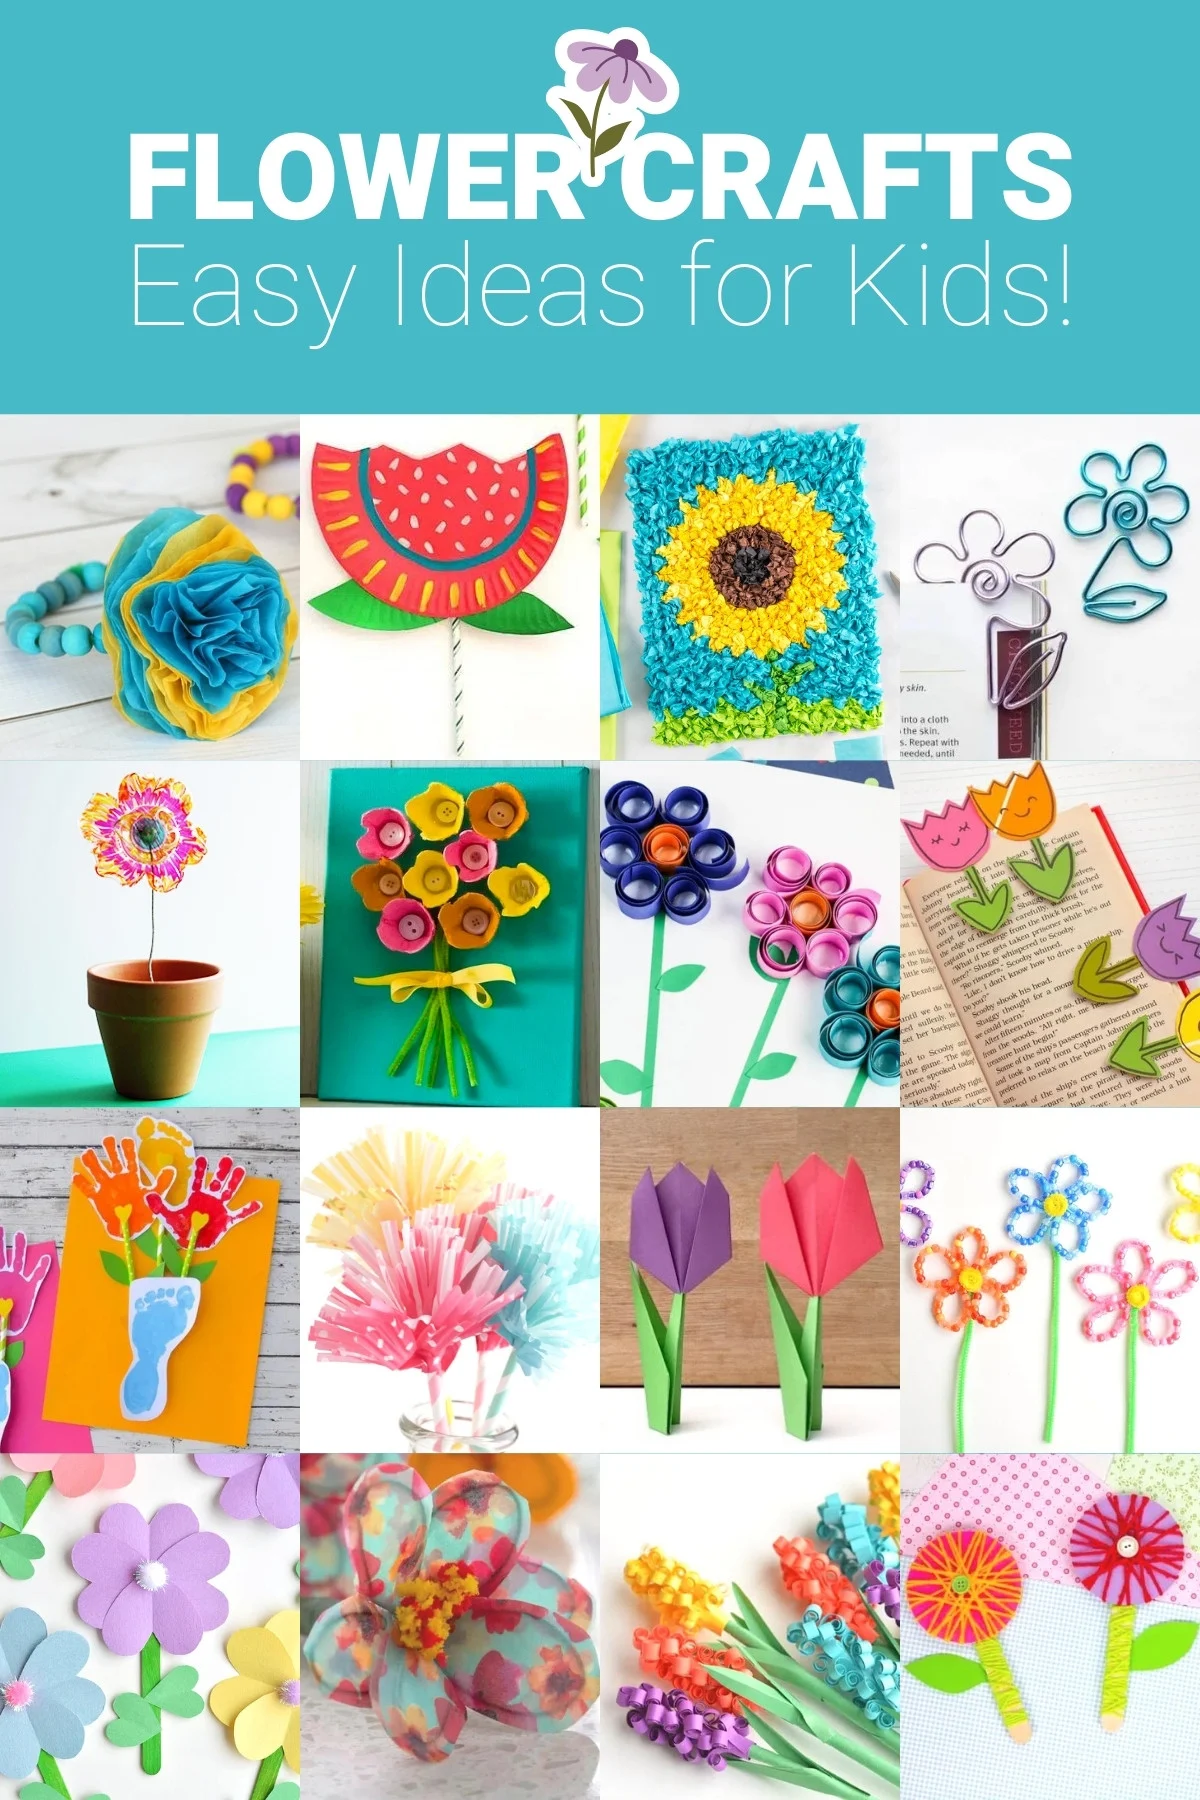 15 Fun Spring Popsicle Stick Crafts Your Kids Will Love to Make